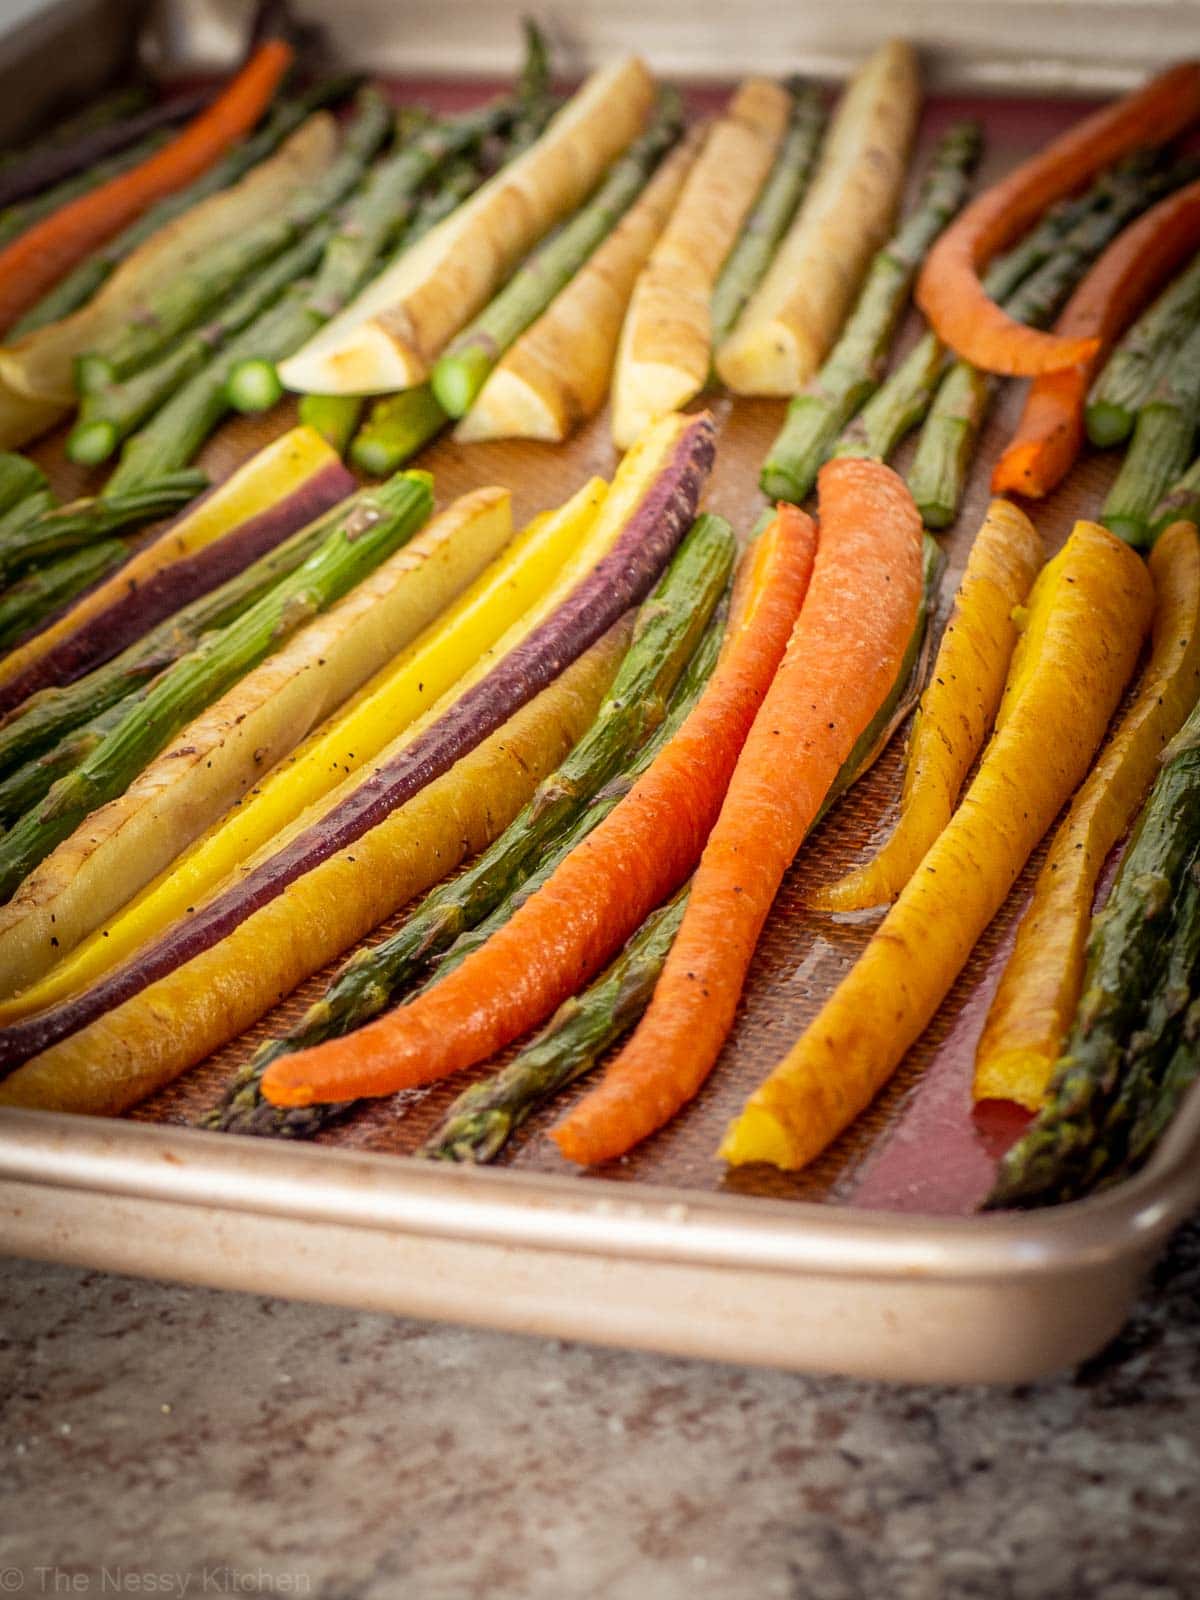 Carrots and asparagus on a sheet pan.